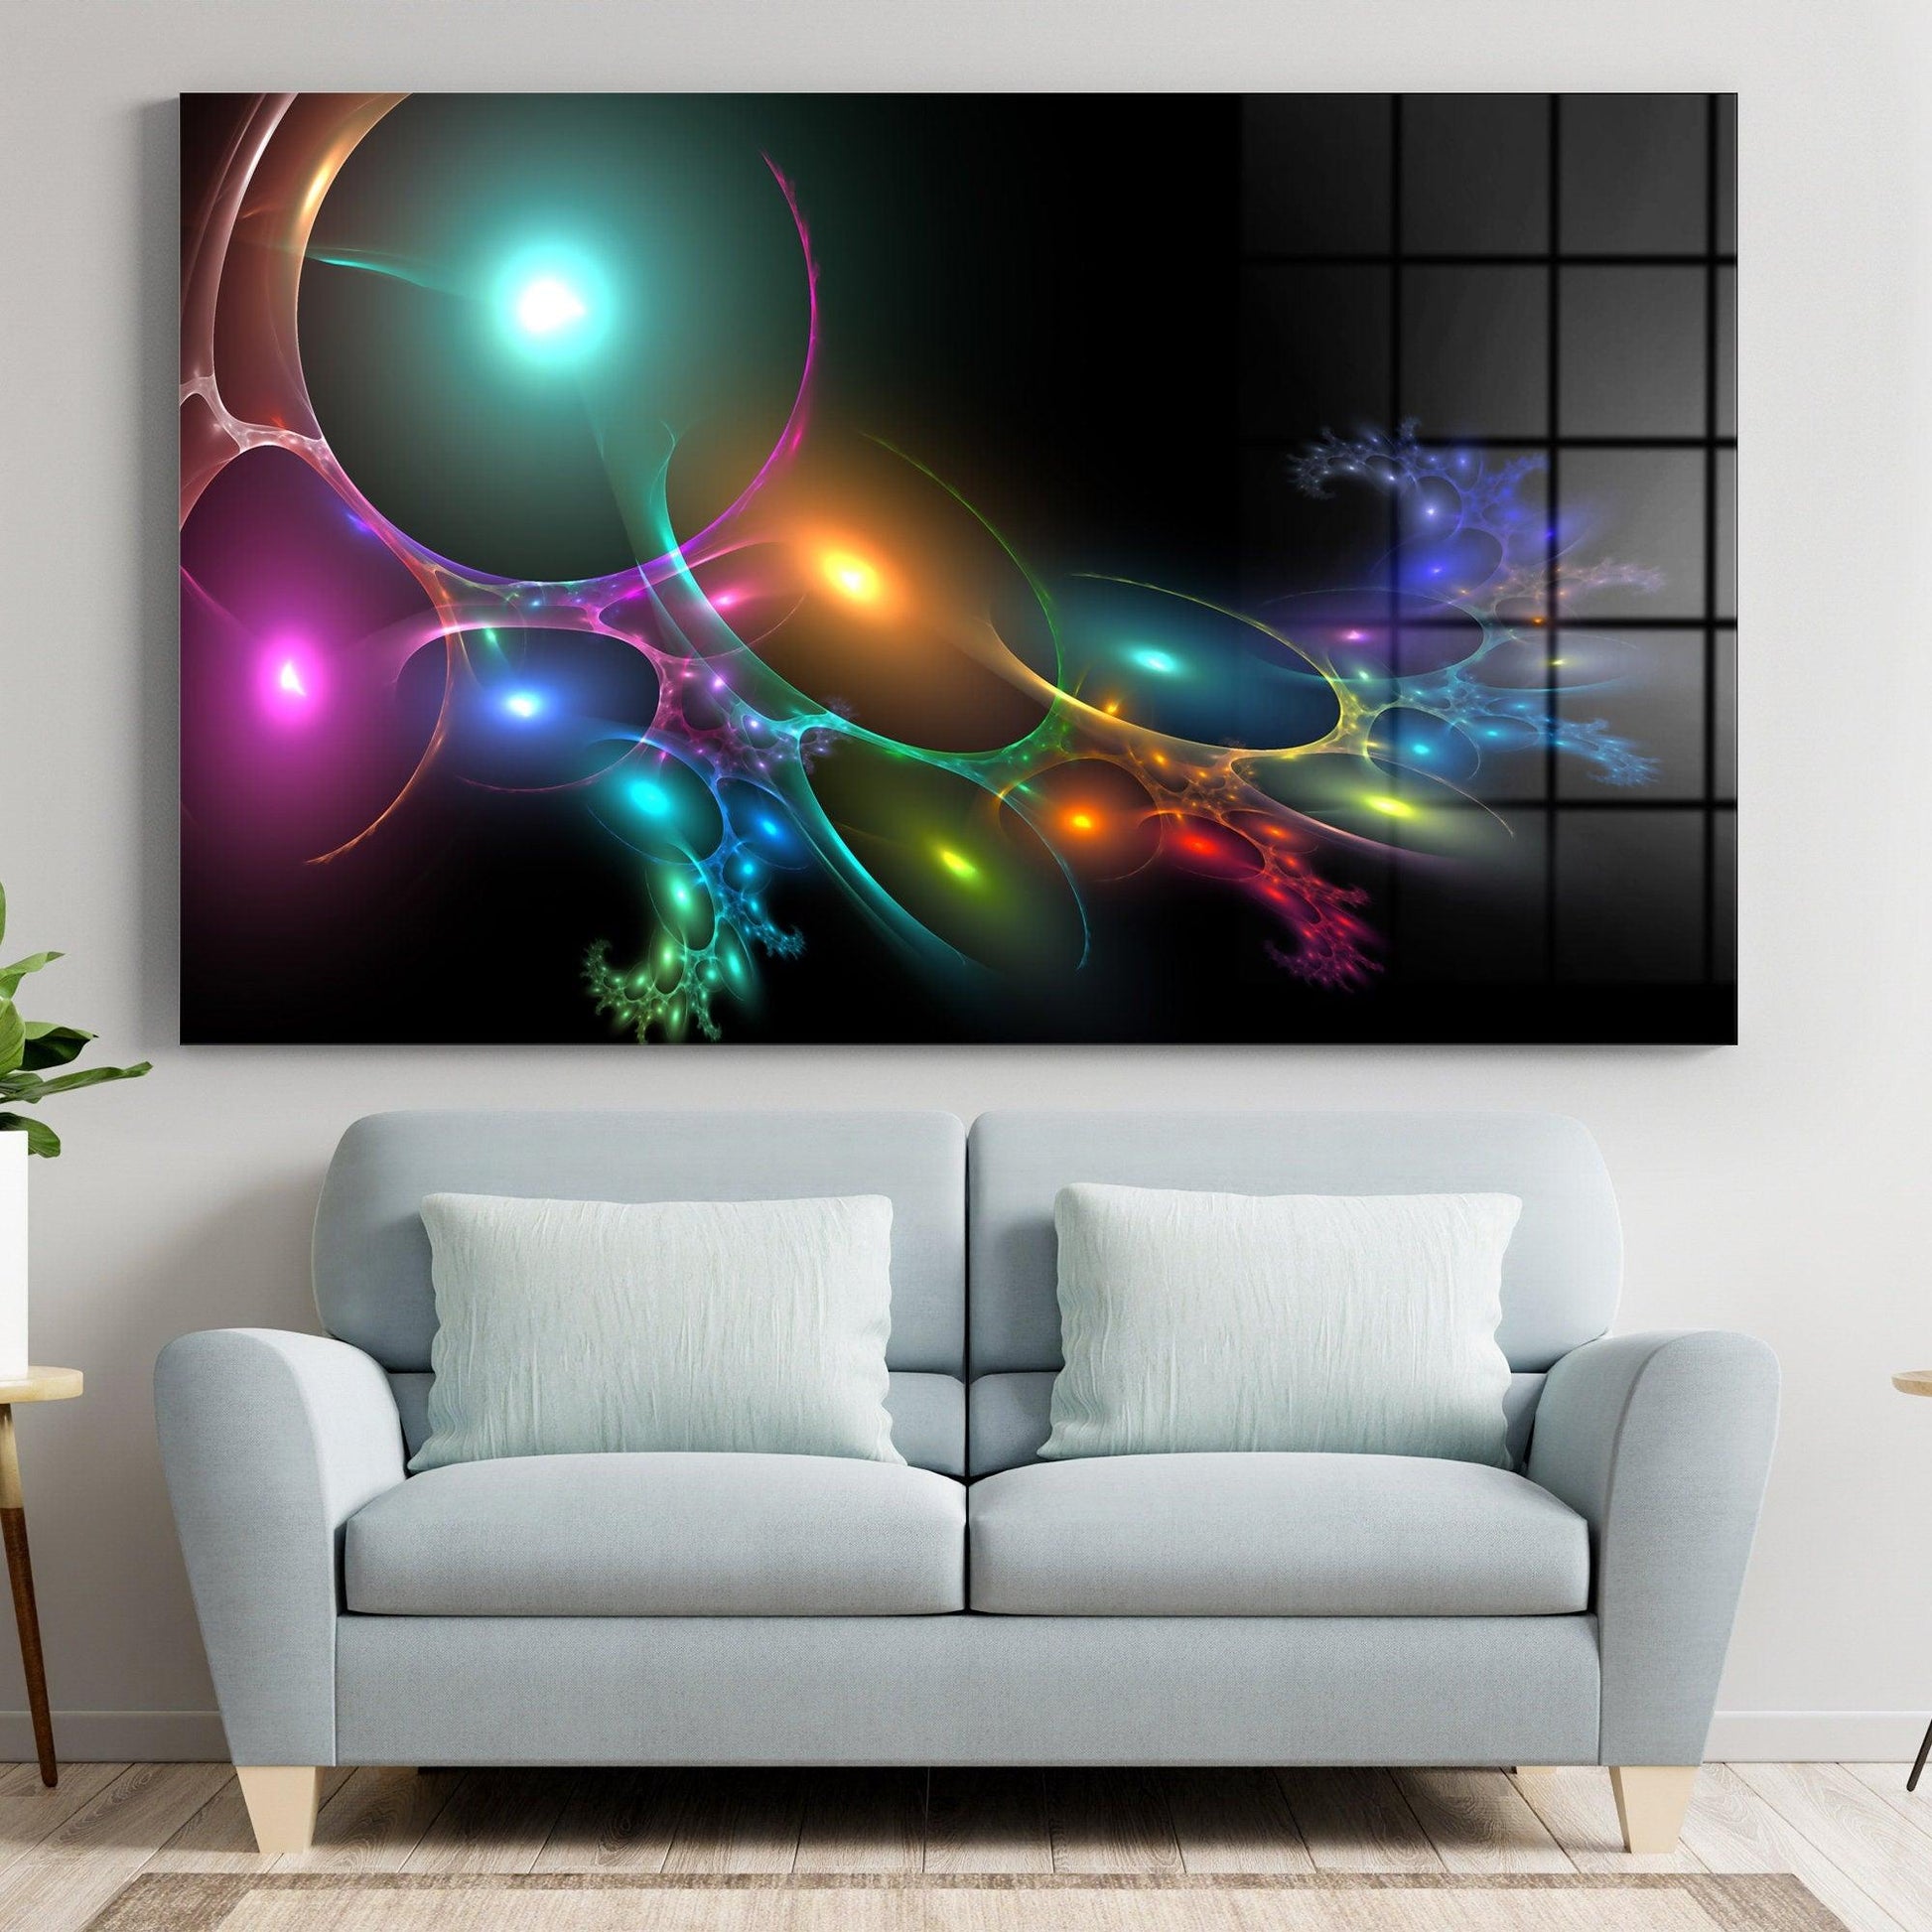 Wonderful Acrylic Painting | Abstract Wall Decor, Elegant Abstract Art for Home, Elegant design glass wall art, canvas art for sale